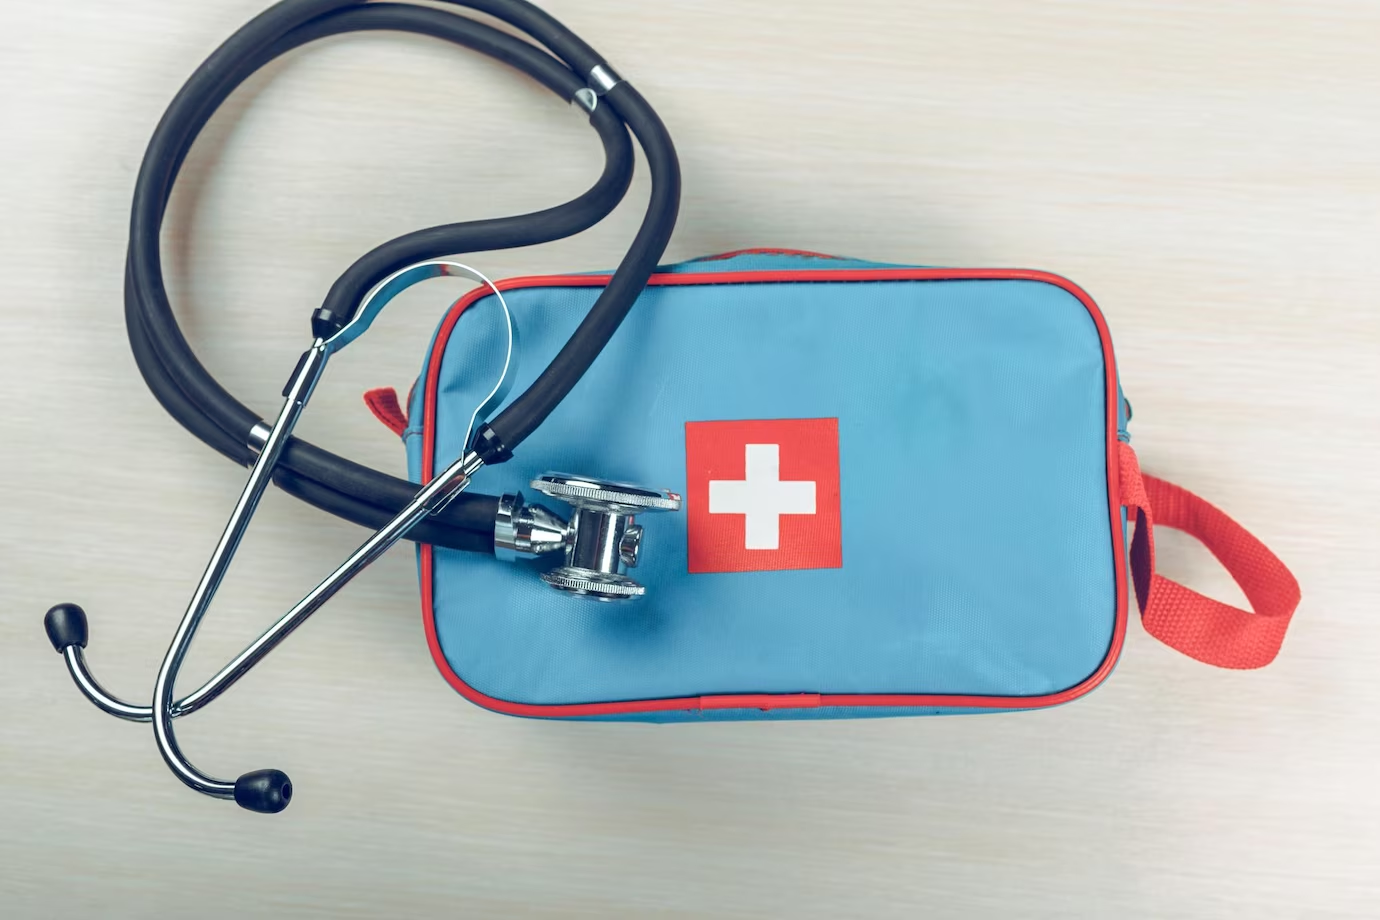 A well-equipped first aid kit symbolises preparedness's importance in Paramedic Science studies.